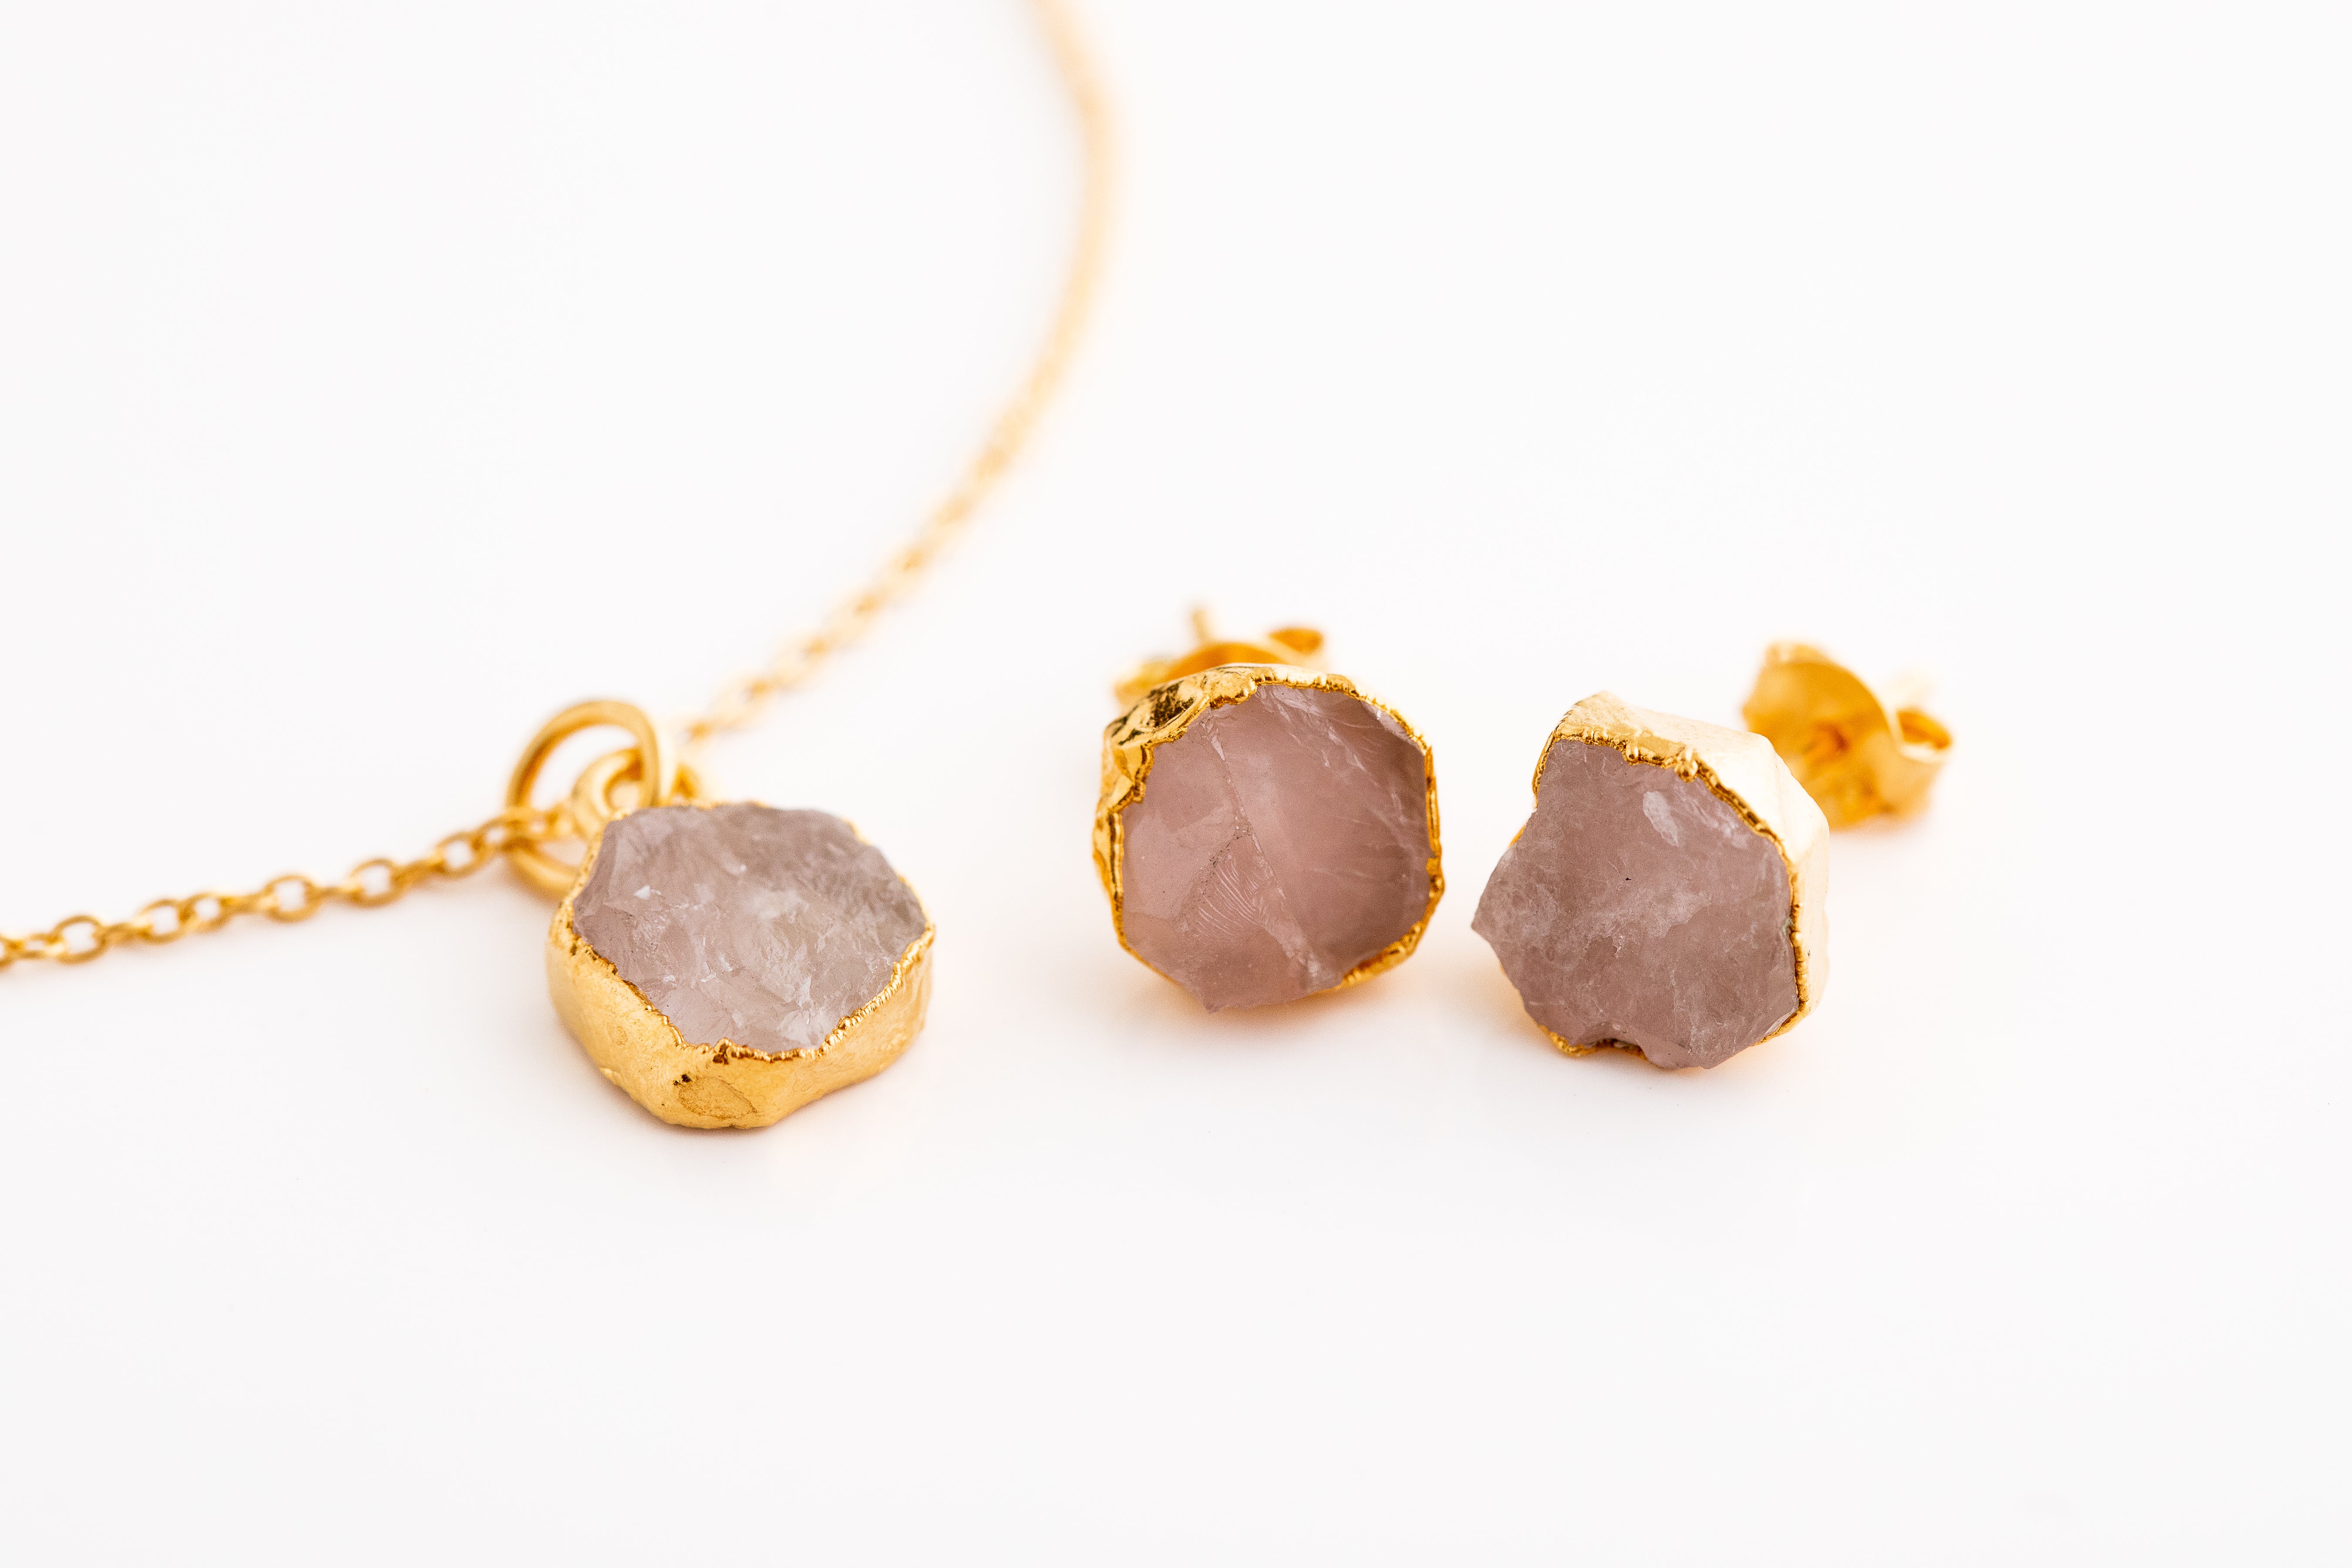 Small Gold Raw Crystal Necklace